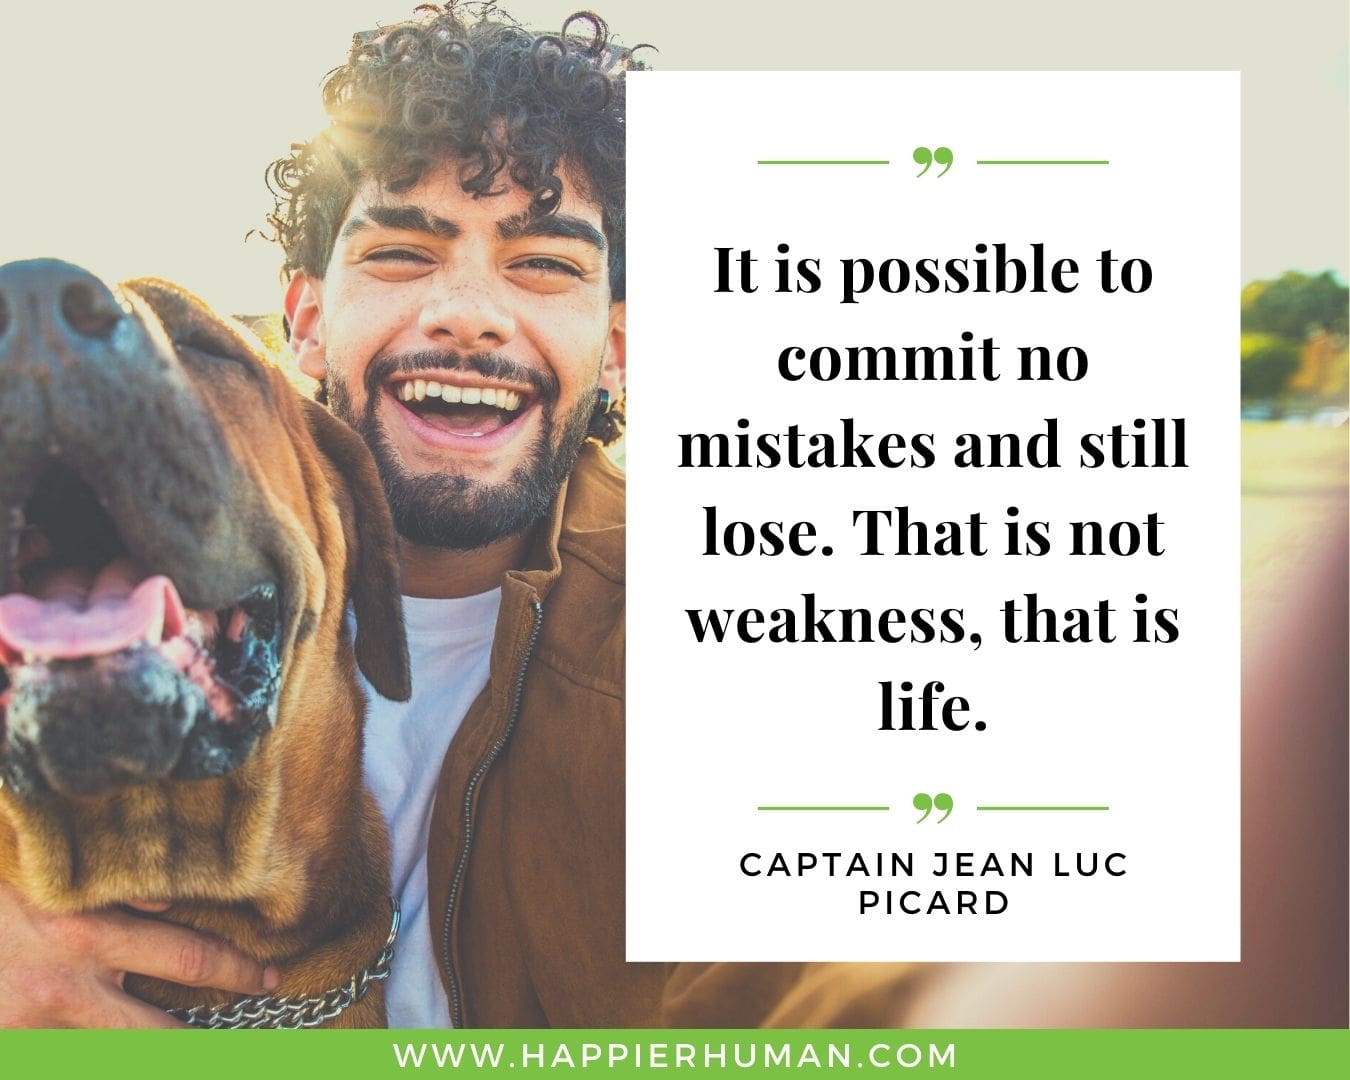 Positive Energy Quotes - “It is possible to commit no mistakes and still lose. That is not weakness, that is life.” - Captain Jean Luc Picard